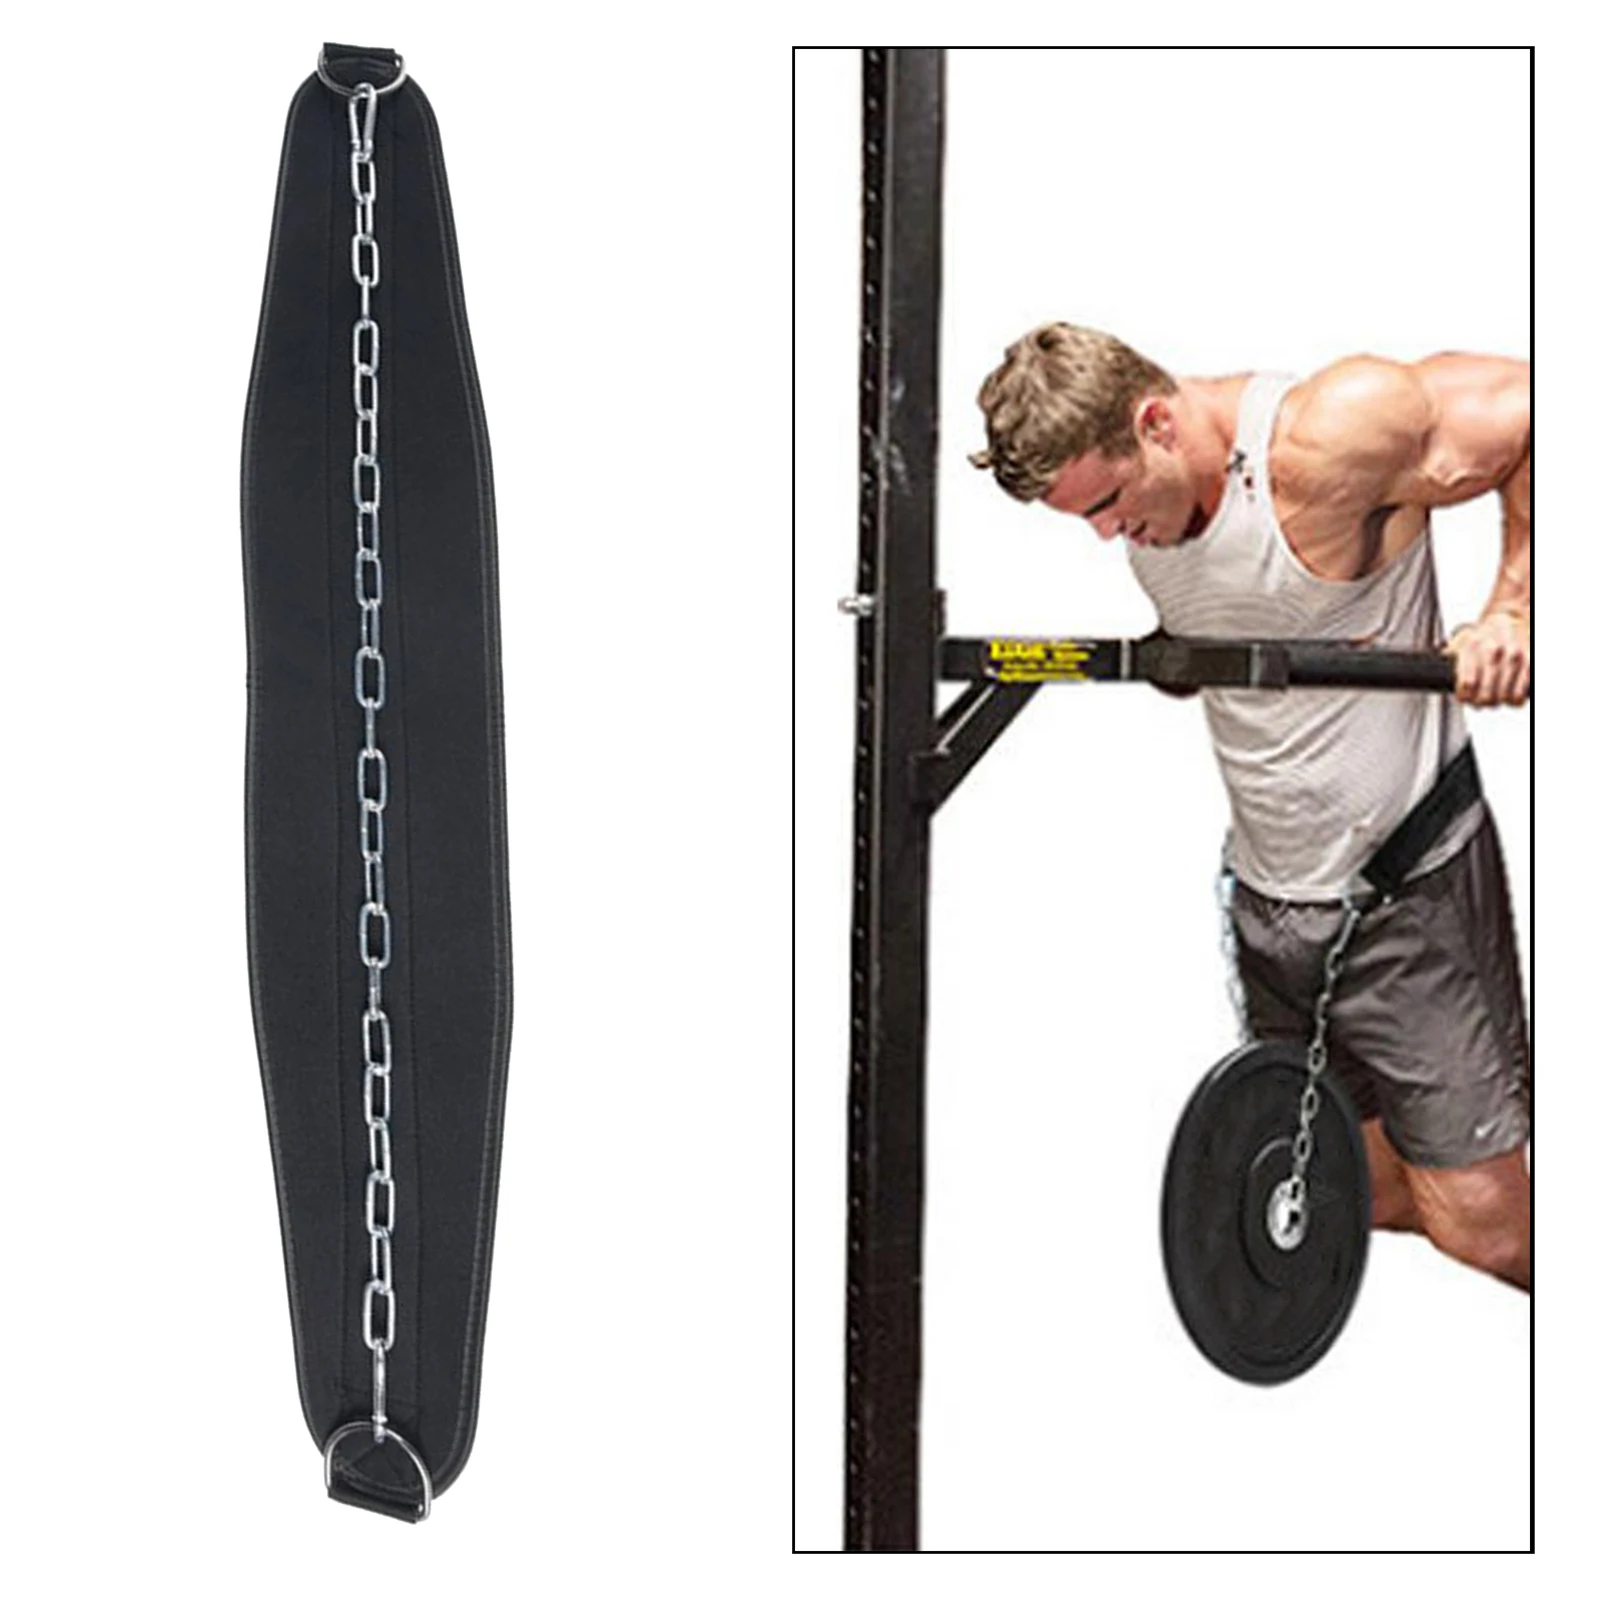 Body Building Weight Lifting DIP Dipping Belt With Chain Strength Gym Equipment 